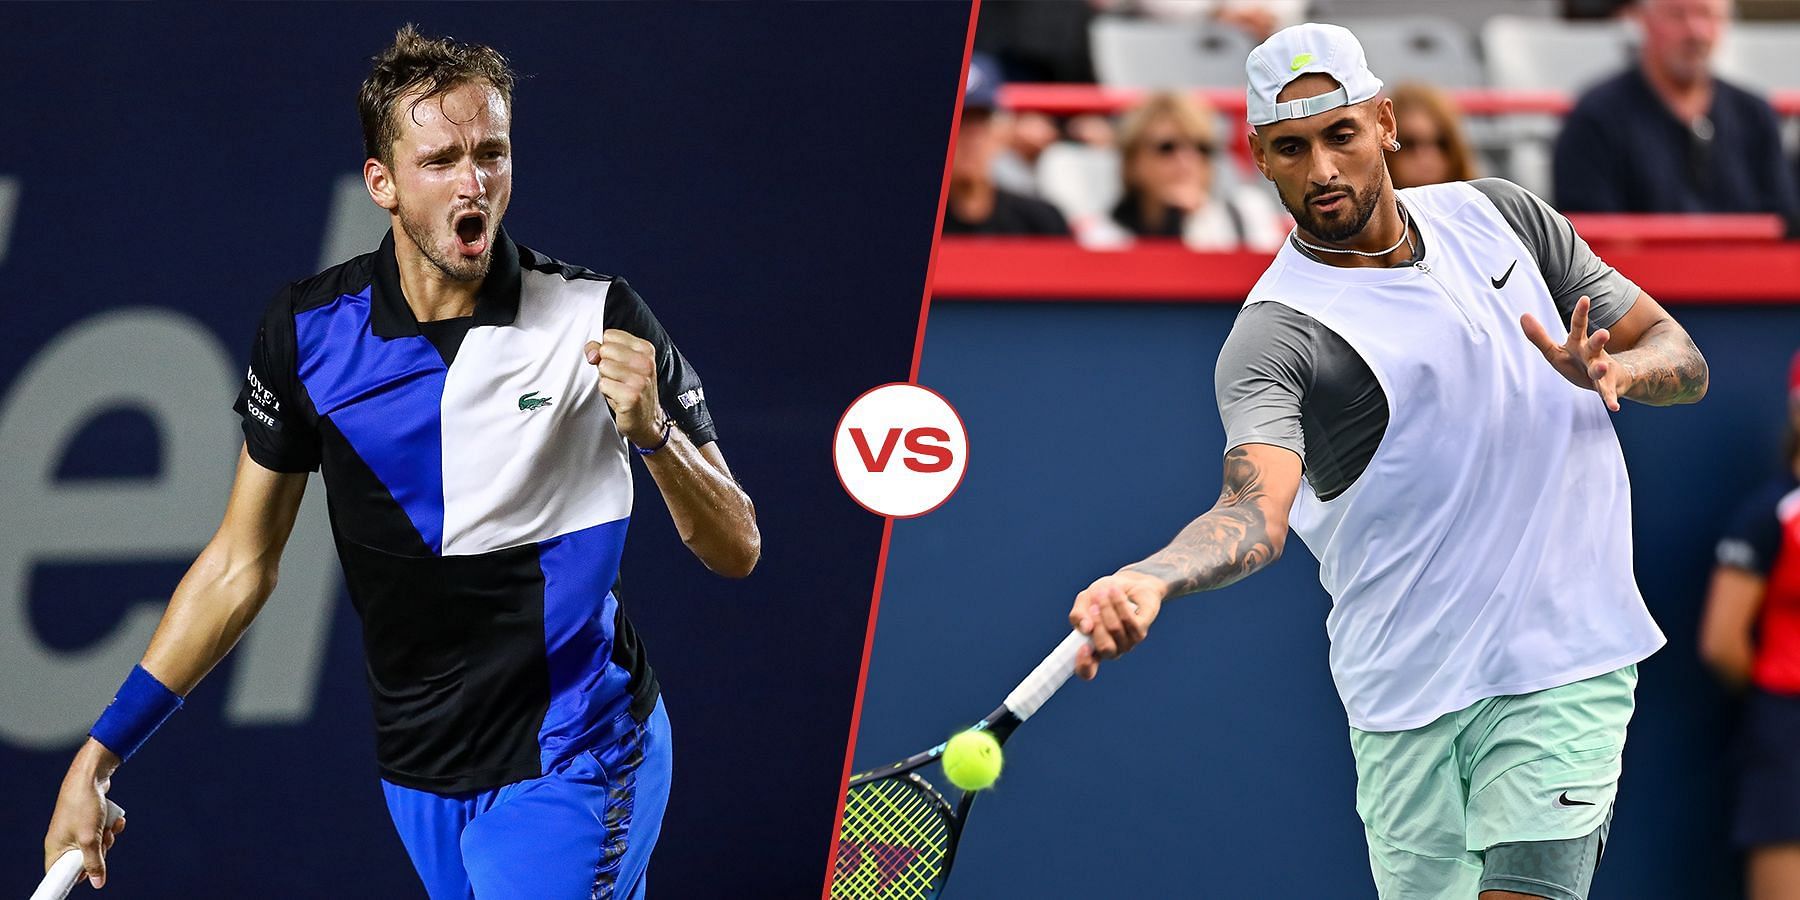 Daniil Medvedev will take on Nick Kyrgios in the second round of the Canadian Open